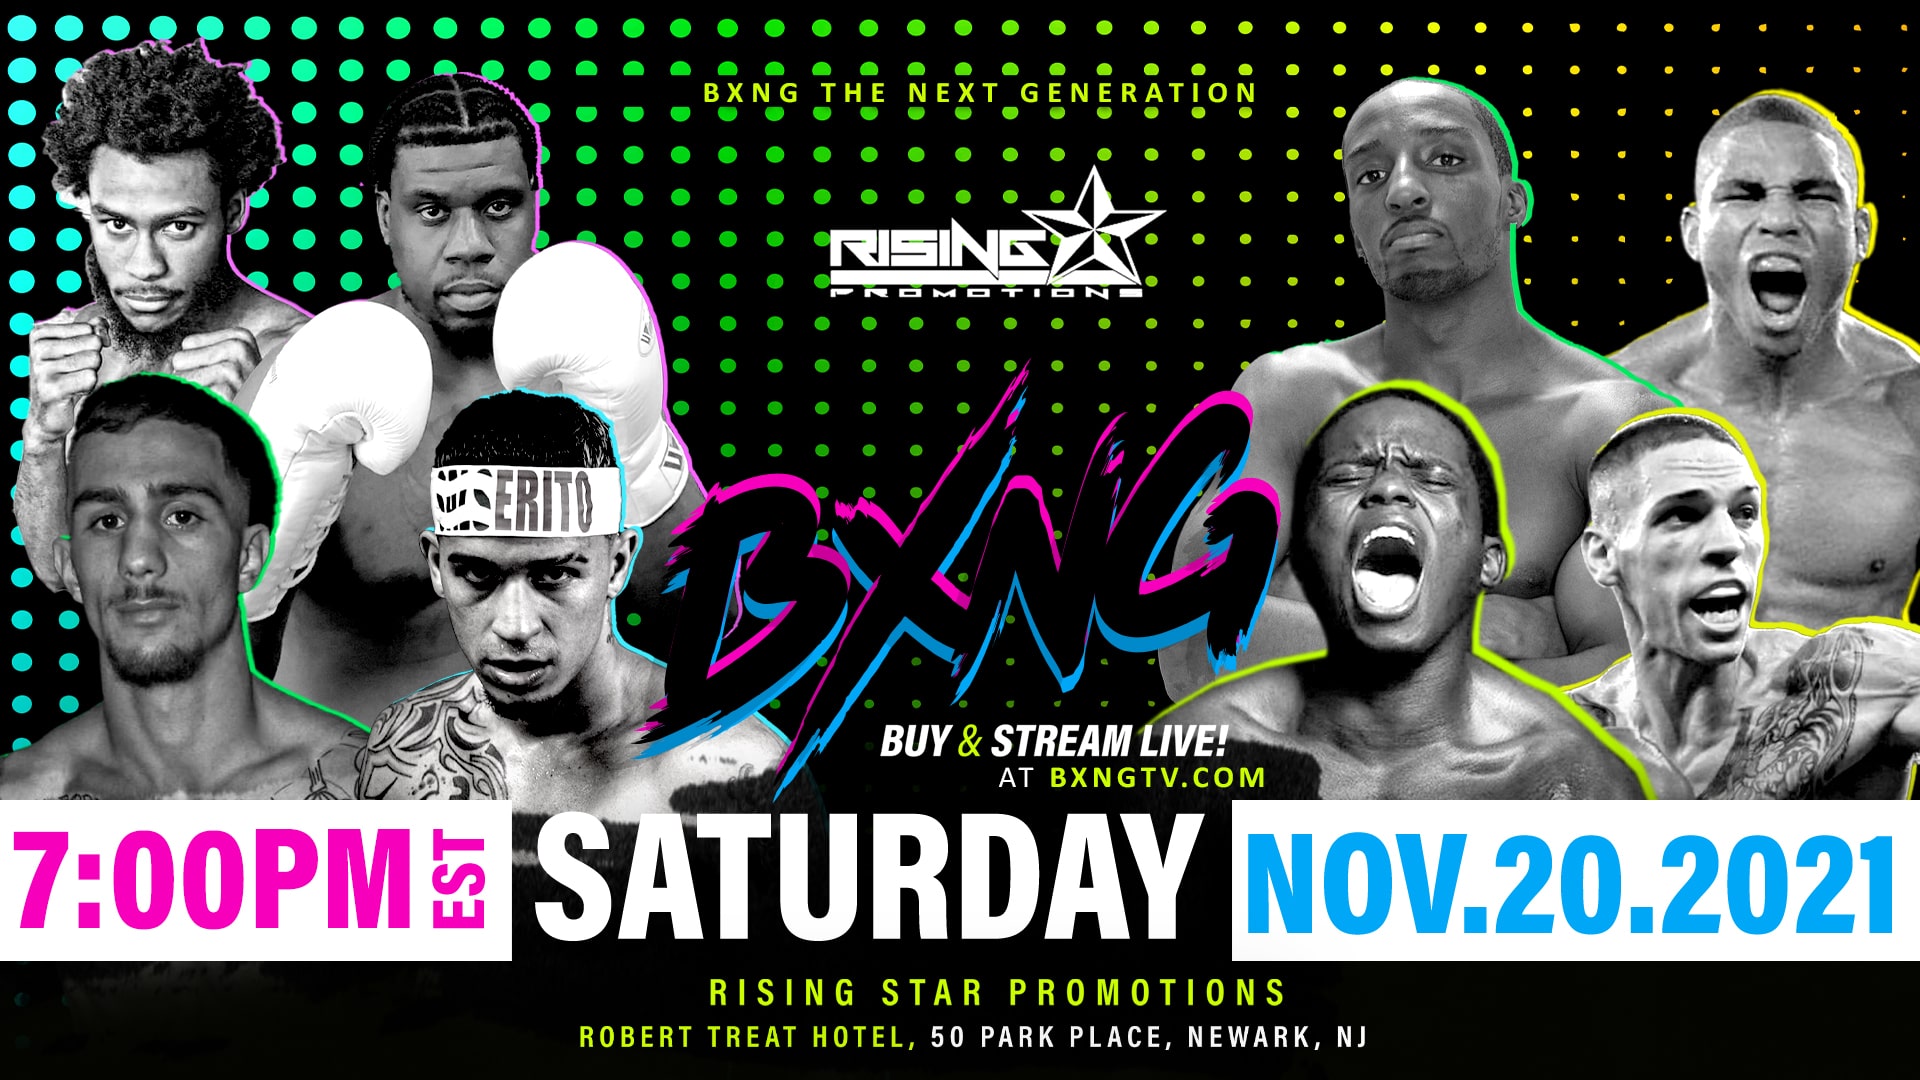 BXNG Presents Rising Star Promotions Show, Live from Newark11/20